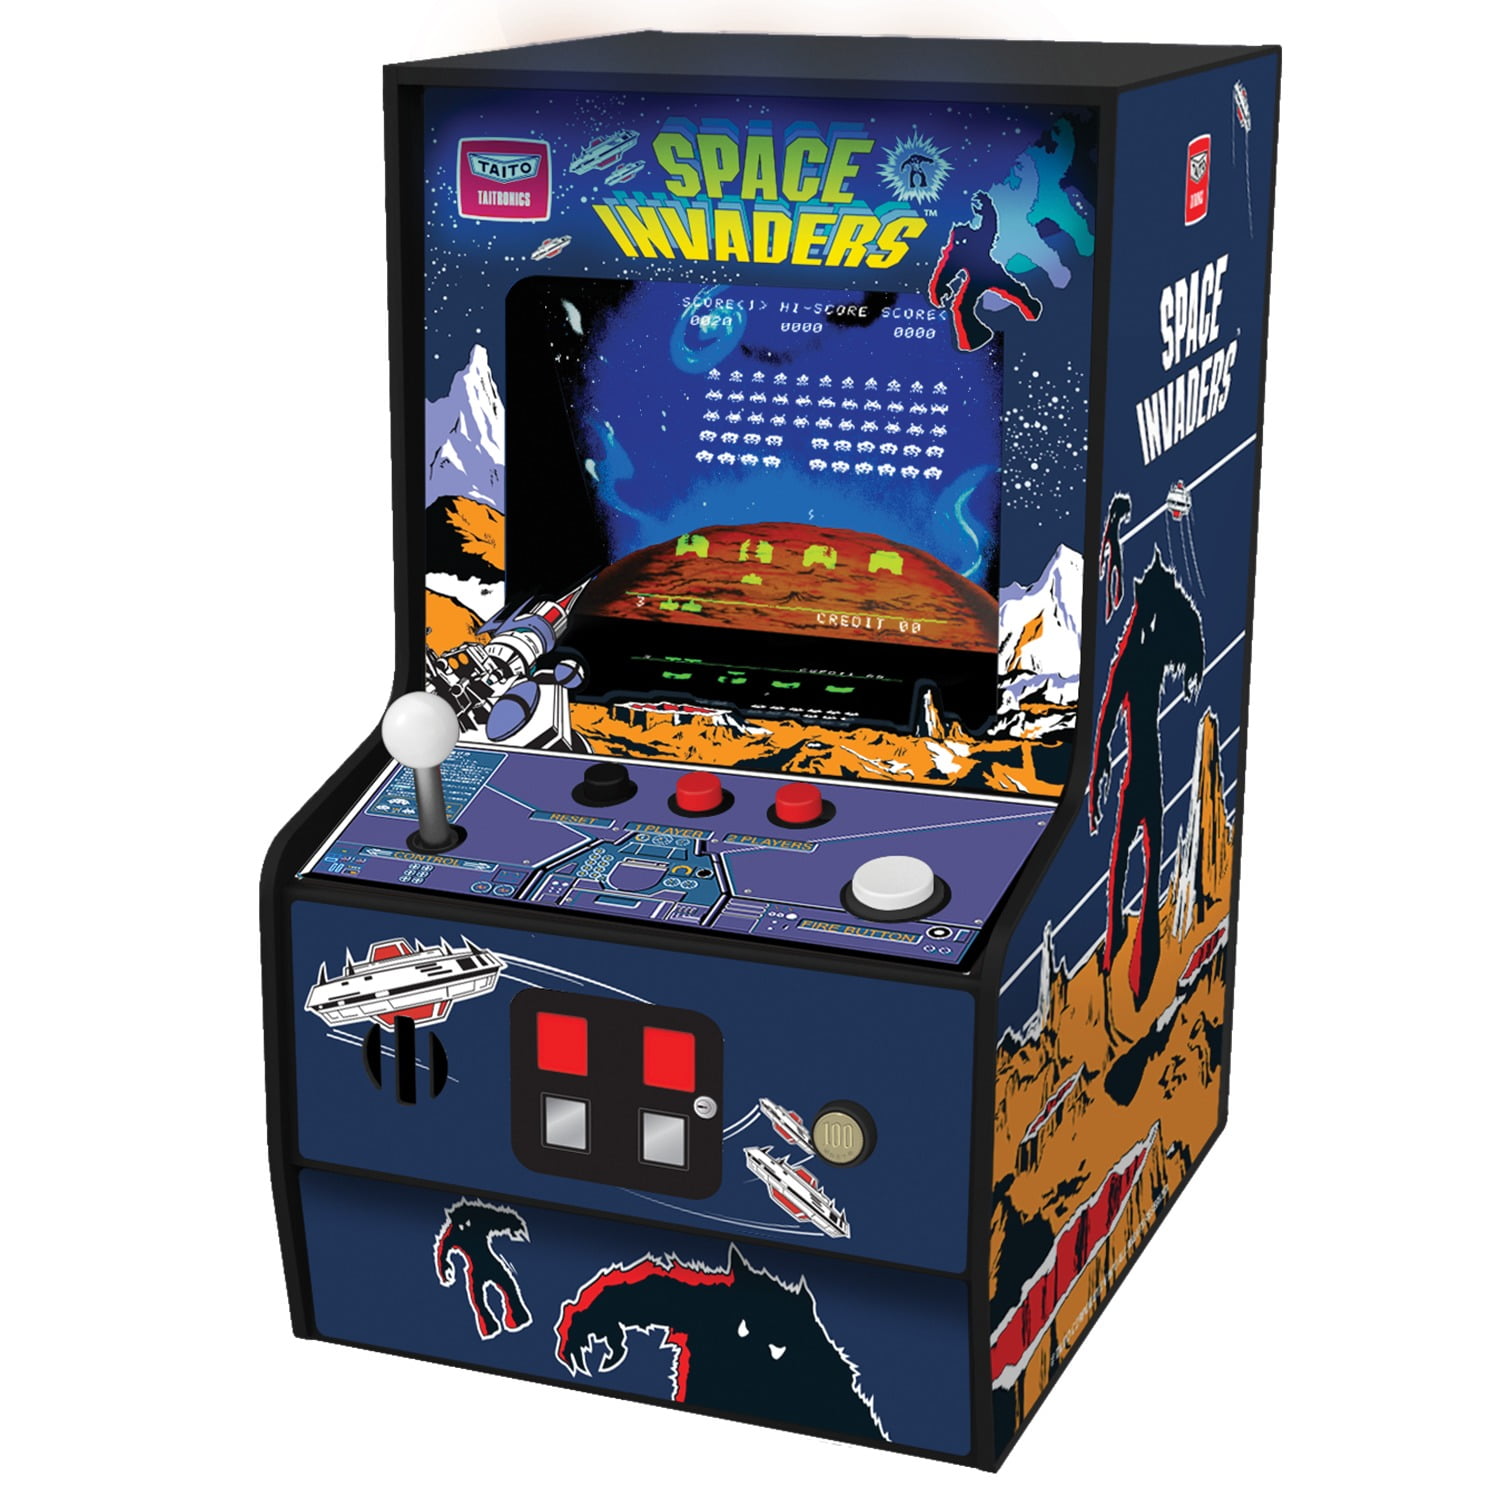 Official Space Invaders Mini Arcade Machine Taito Corp 2016 for sale online 